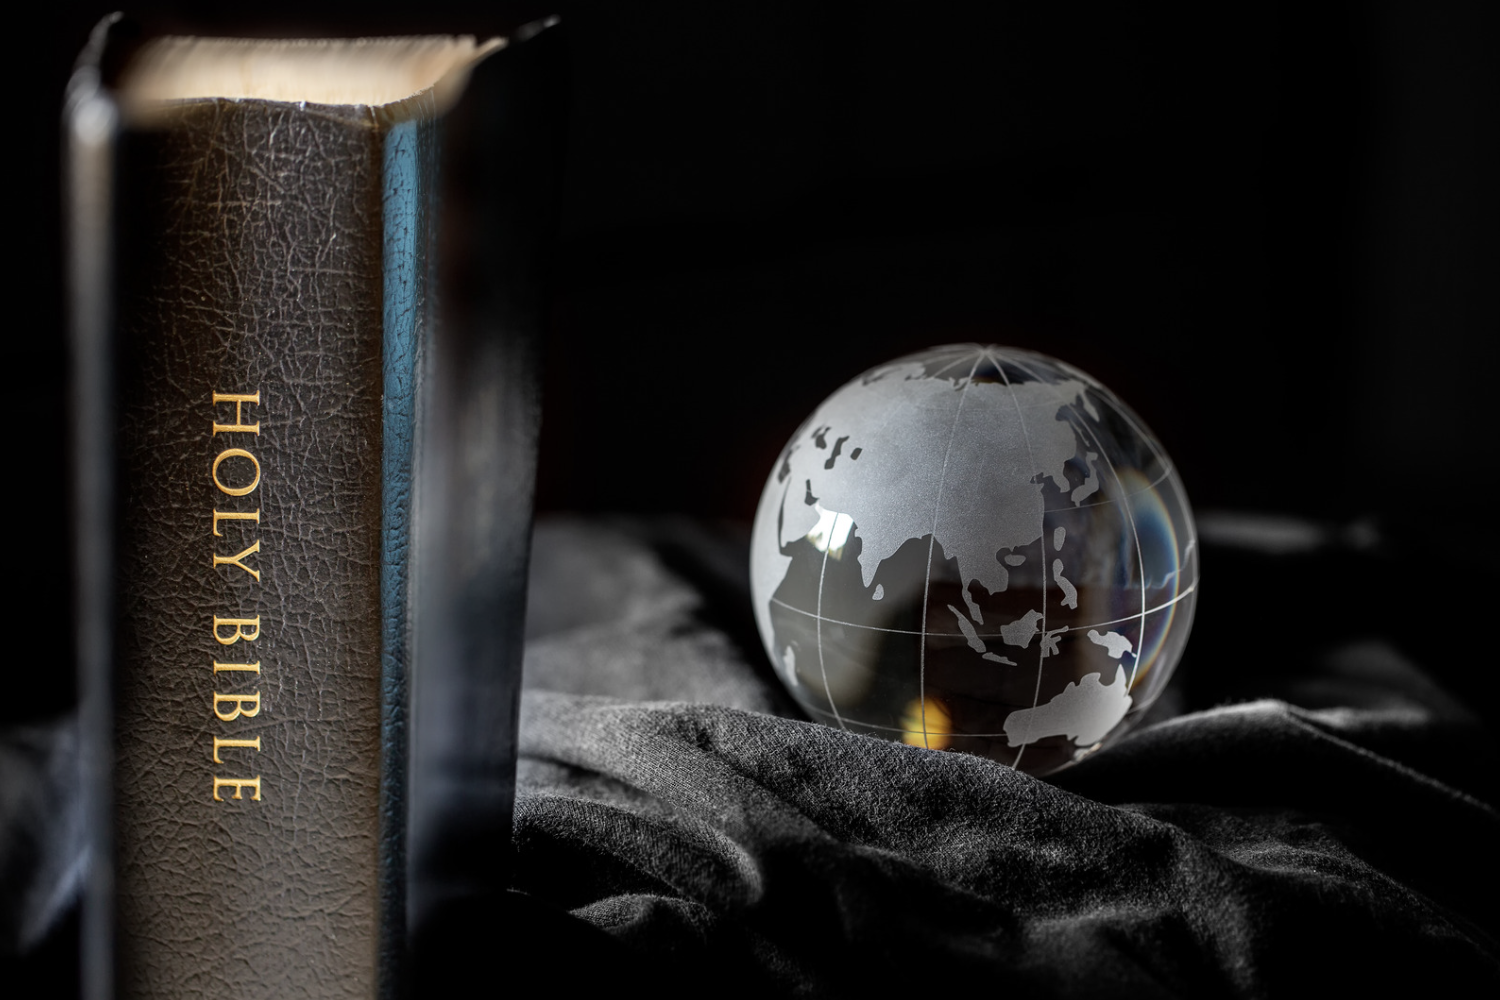 A picture of the Holy Bible with a glass globe